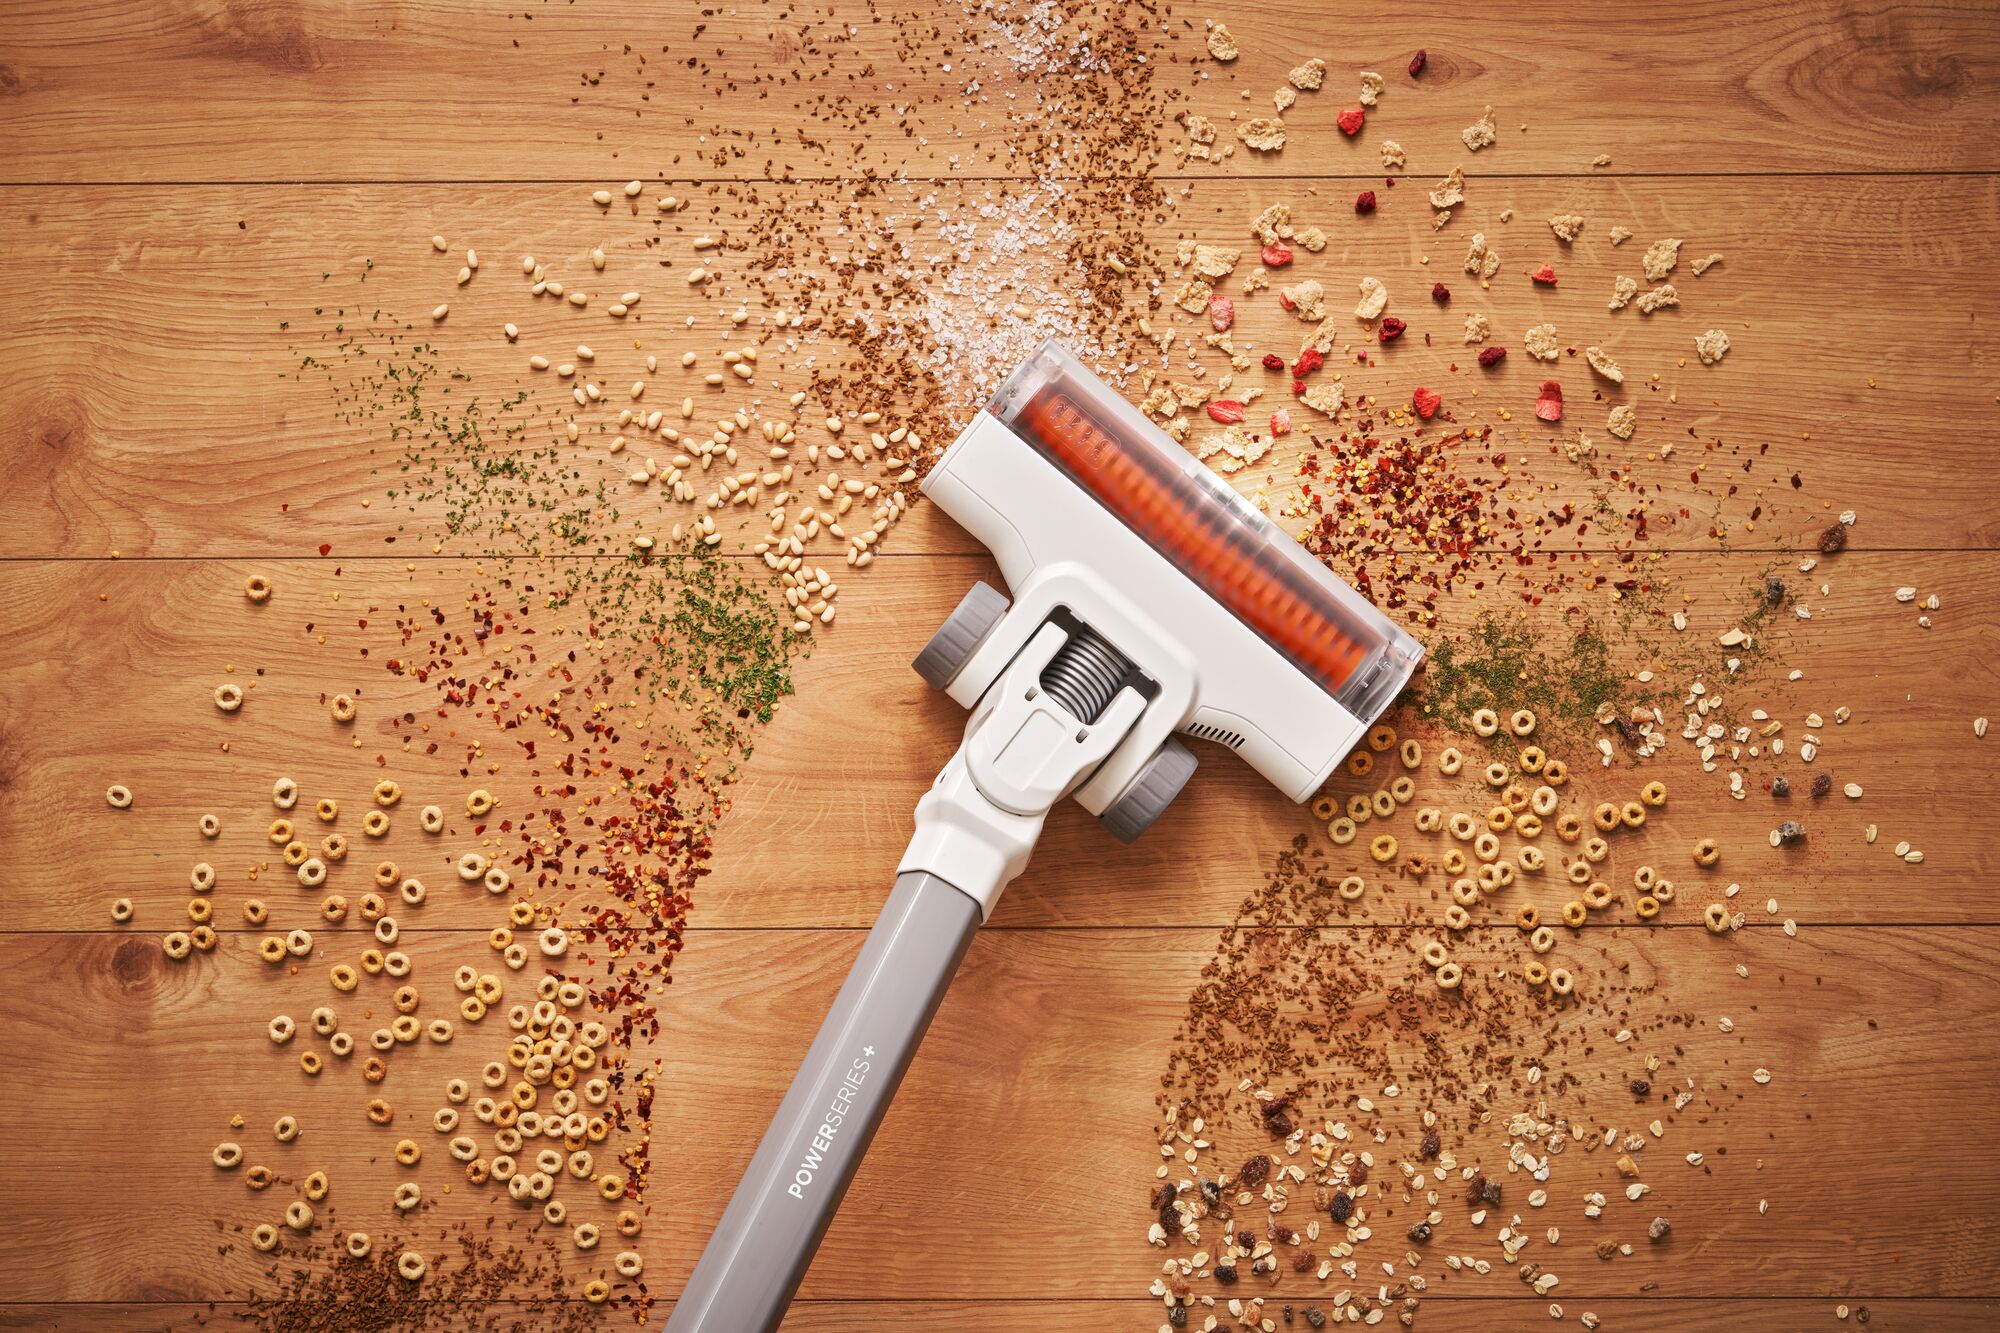 POWERSERIES Cordless Stick Vacuum being used to clean mess on a floor.